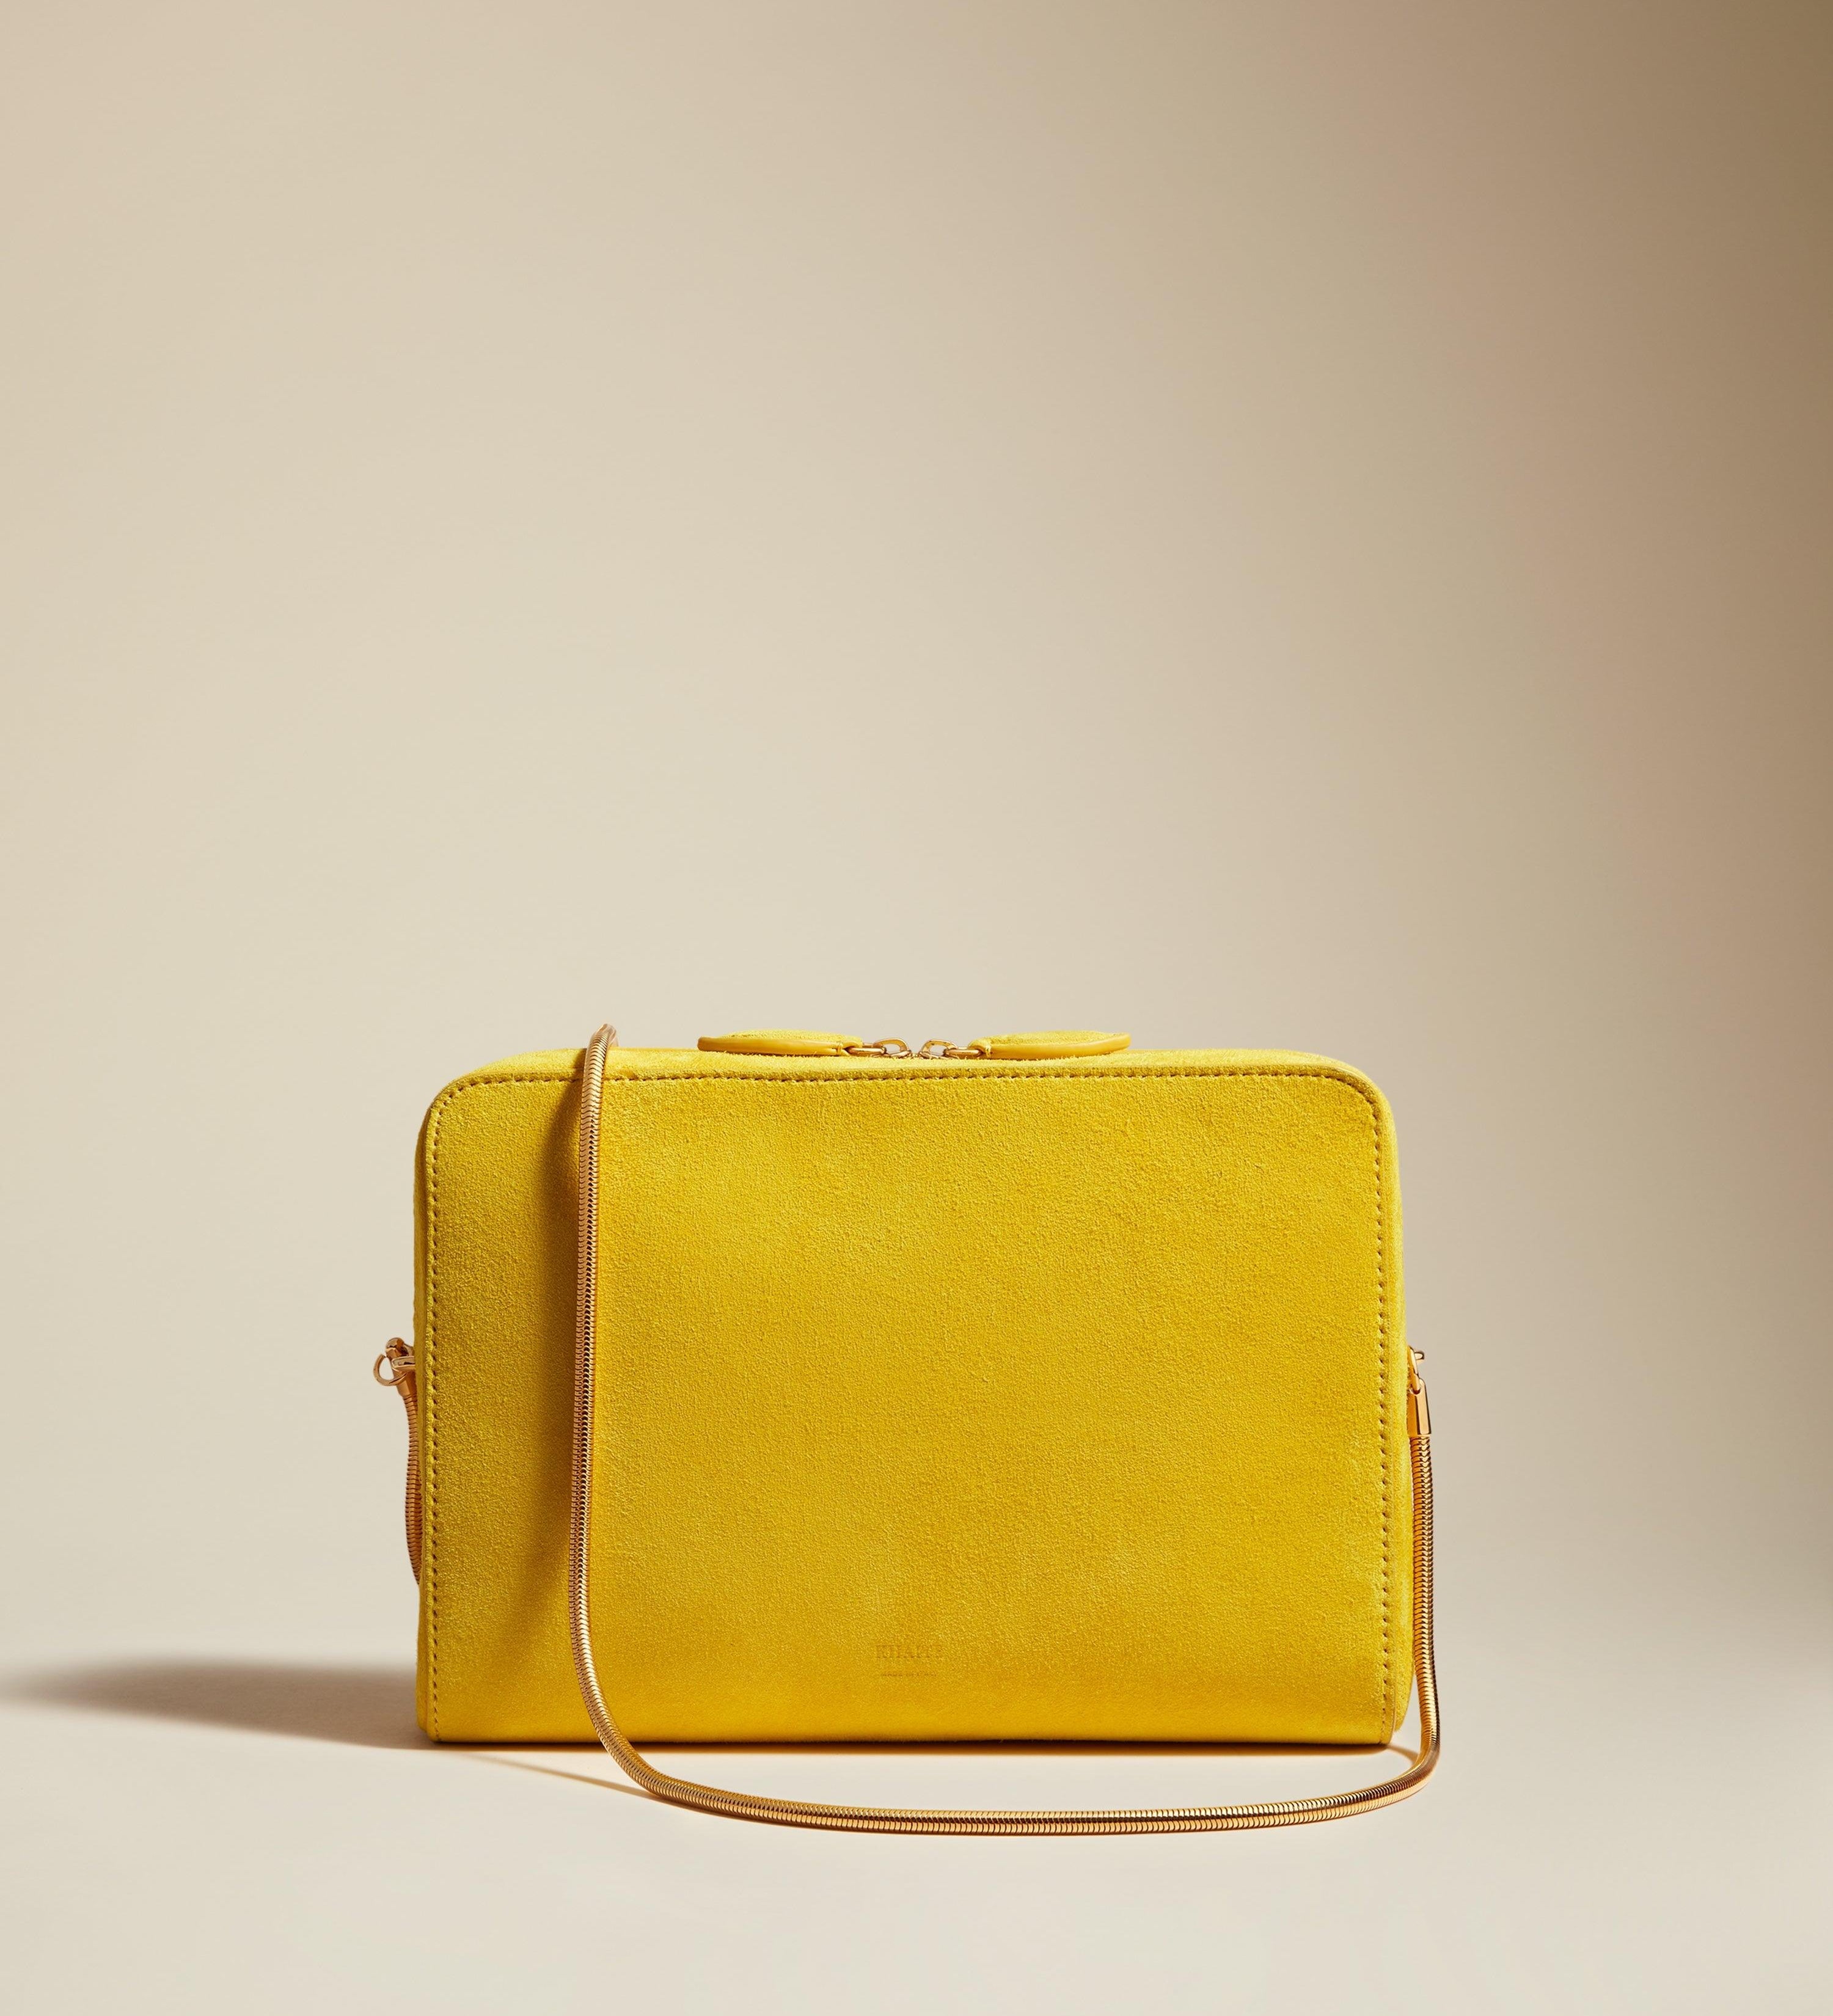 The Anna Crossbody Bag in Lemon Suede - The Iconic Issue